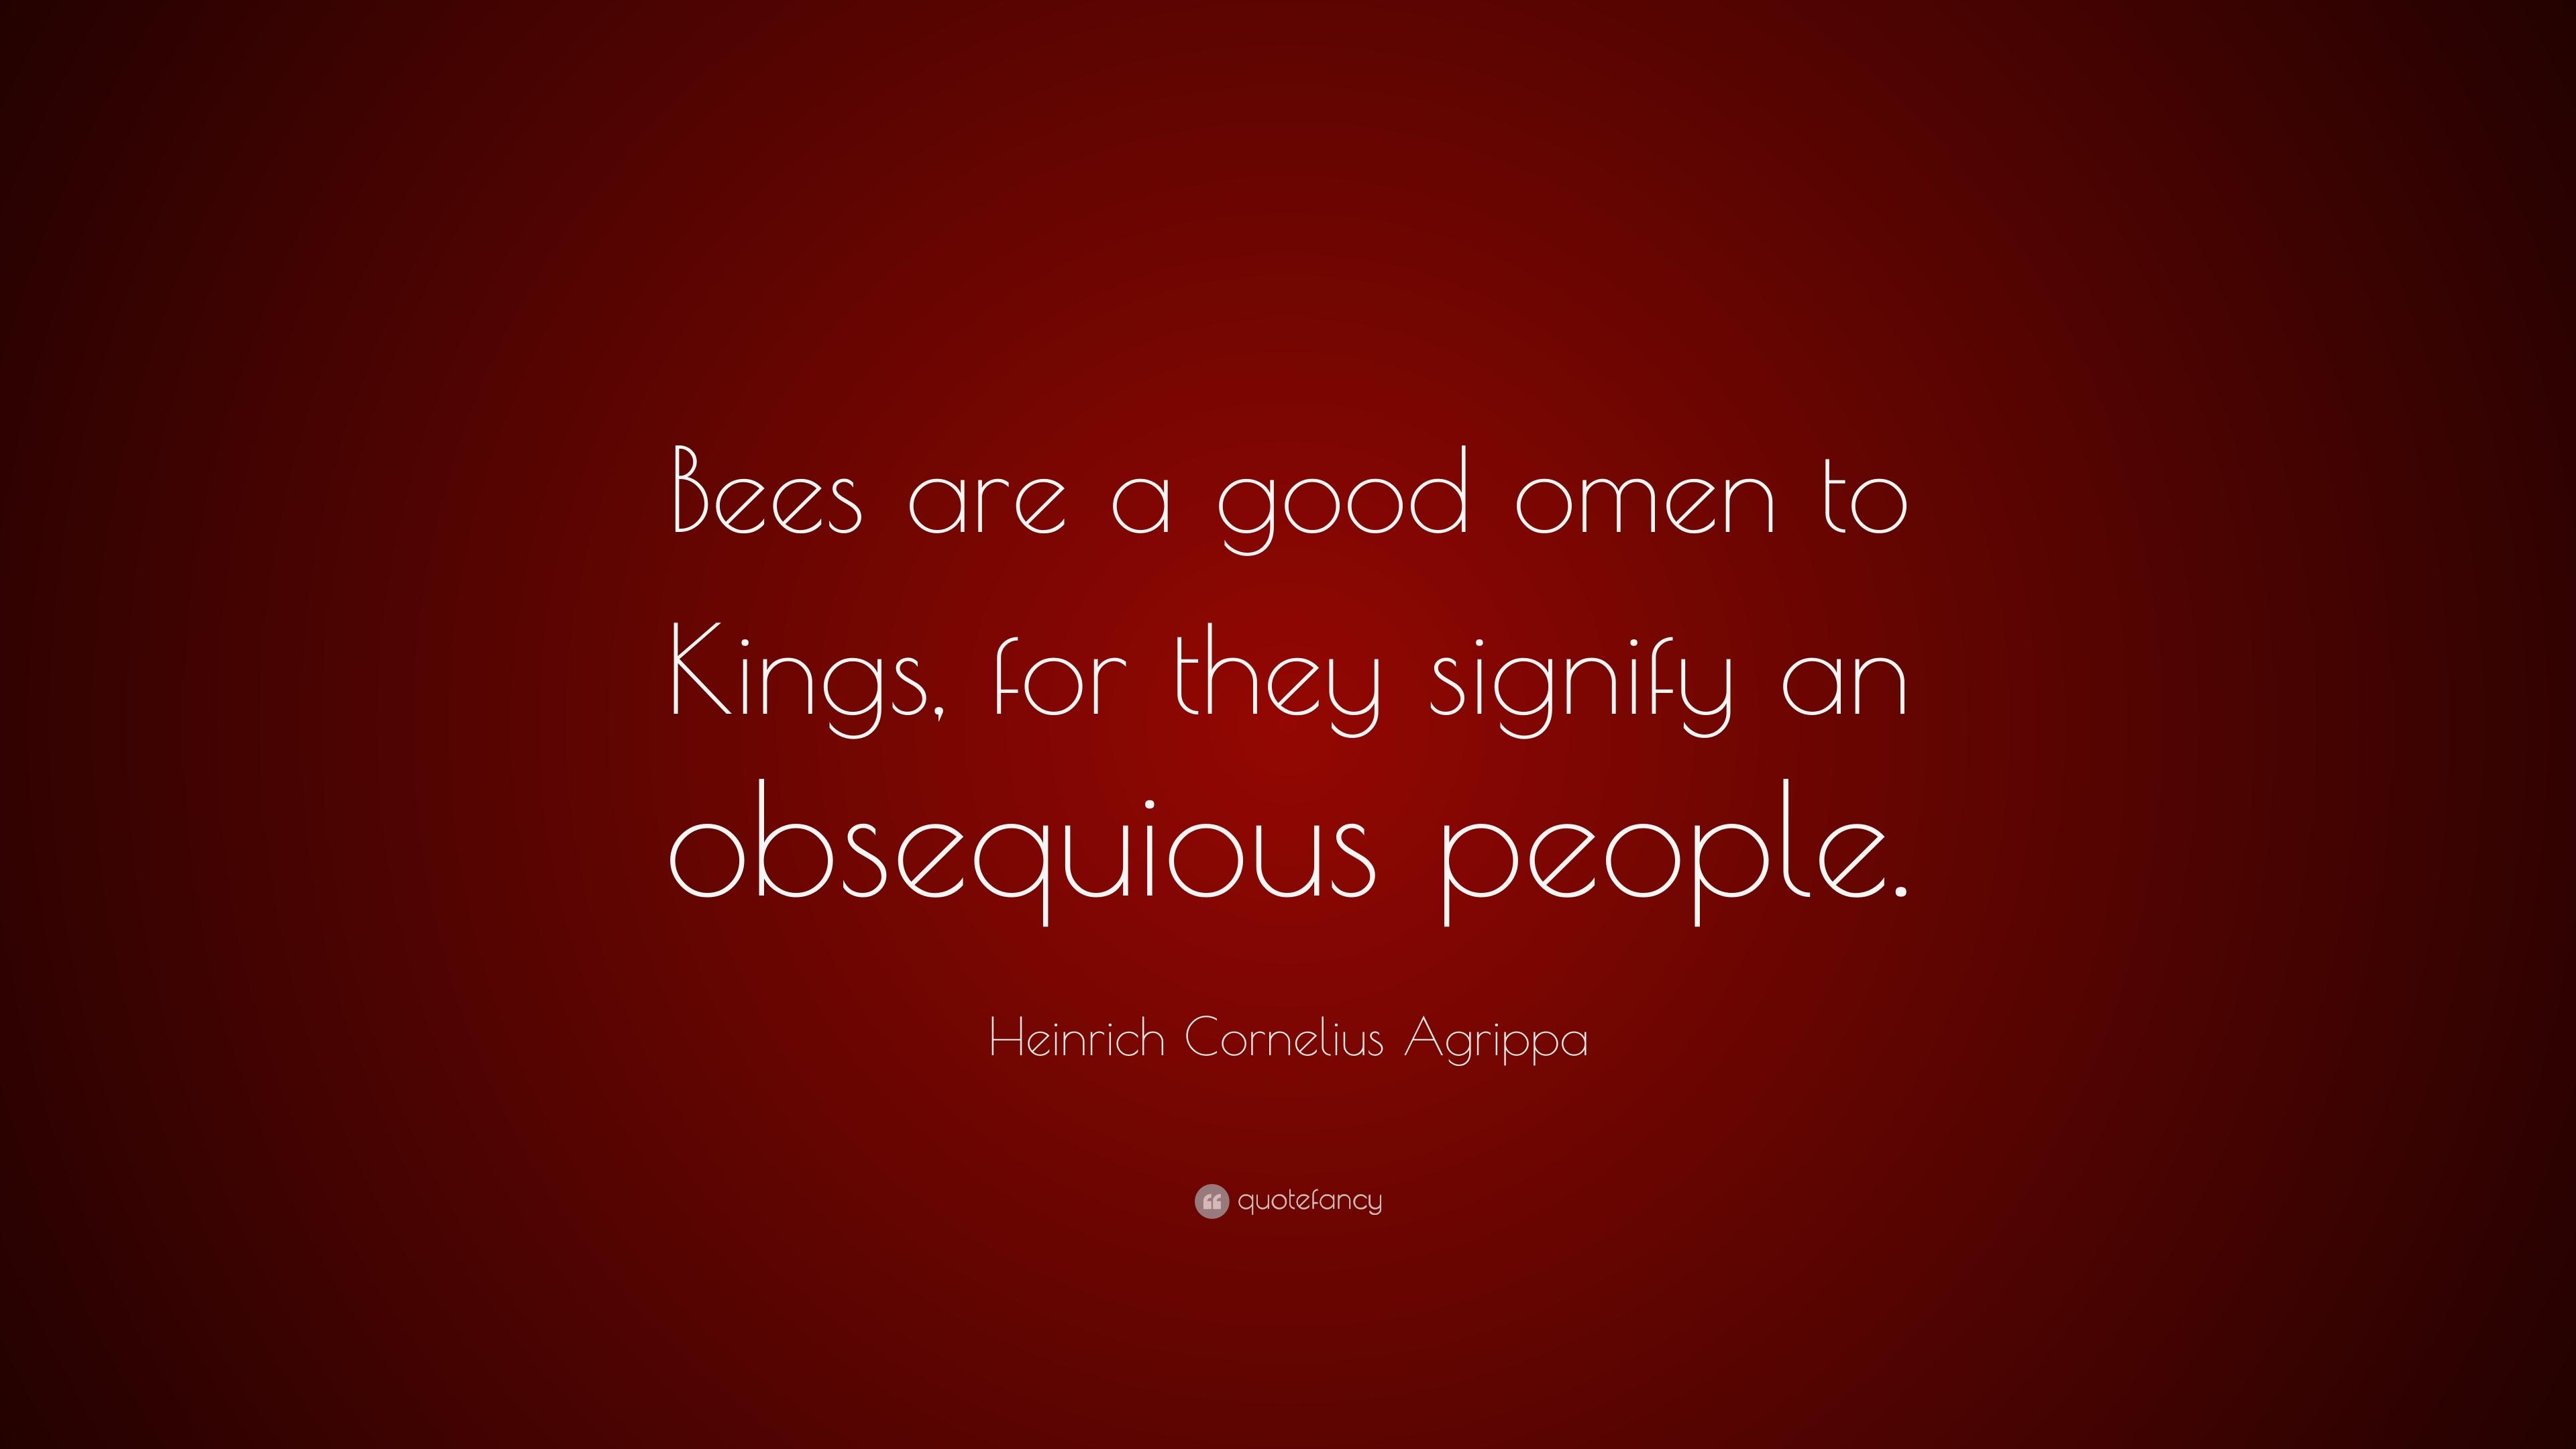 Heinrich Cornelius Agrippa Quote: “Bees are a good omen to Kings